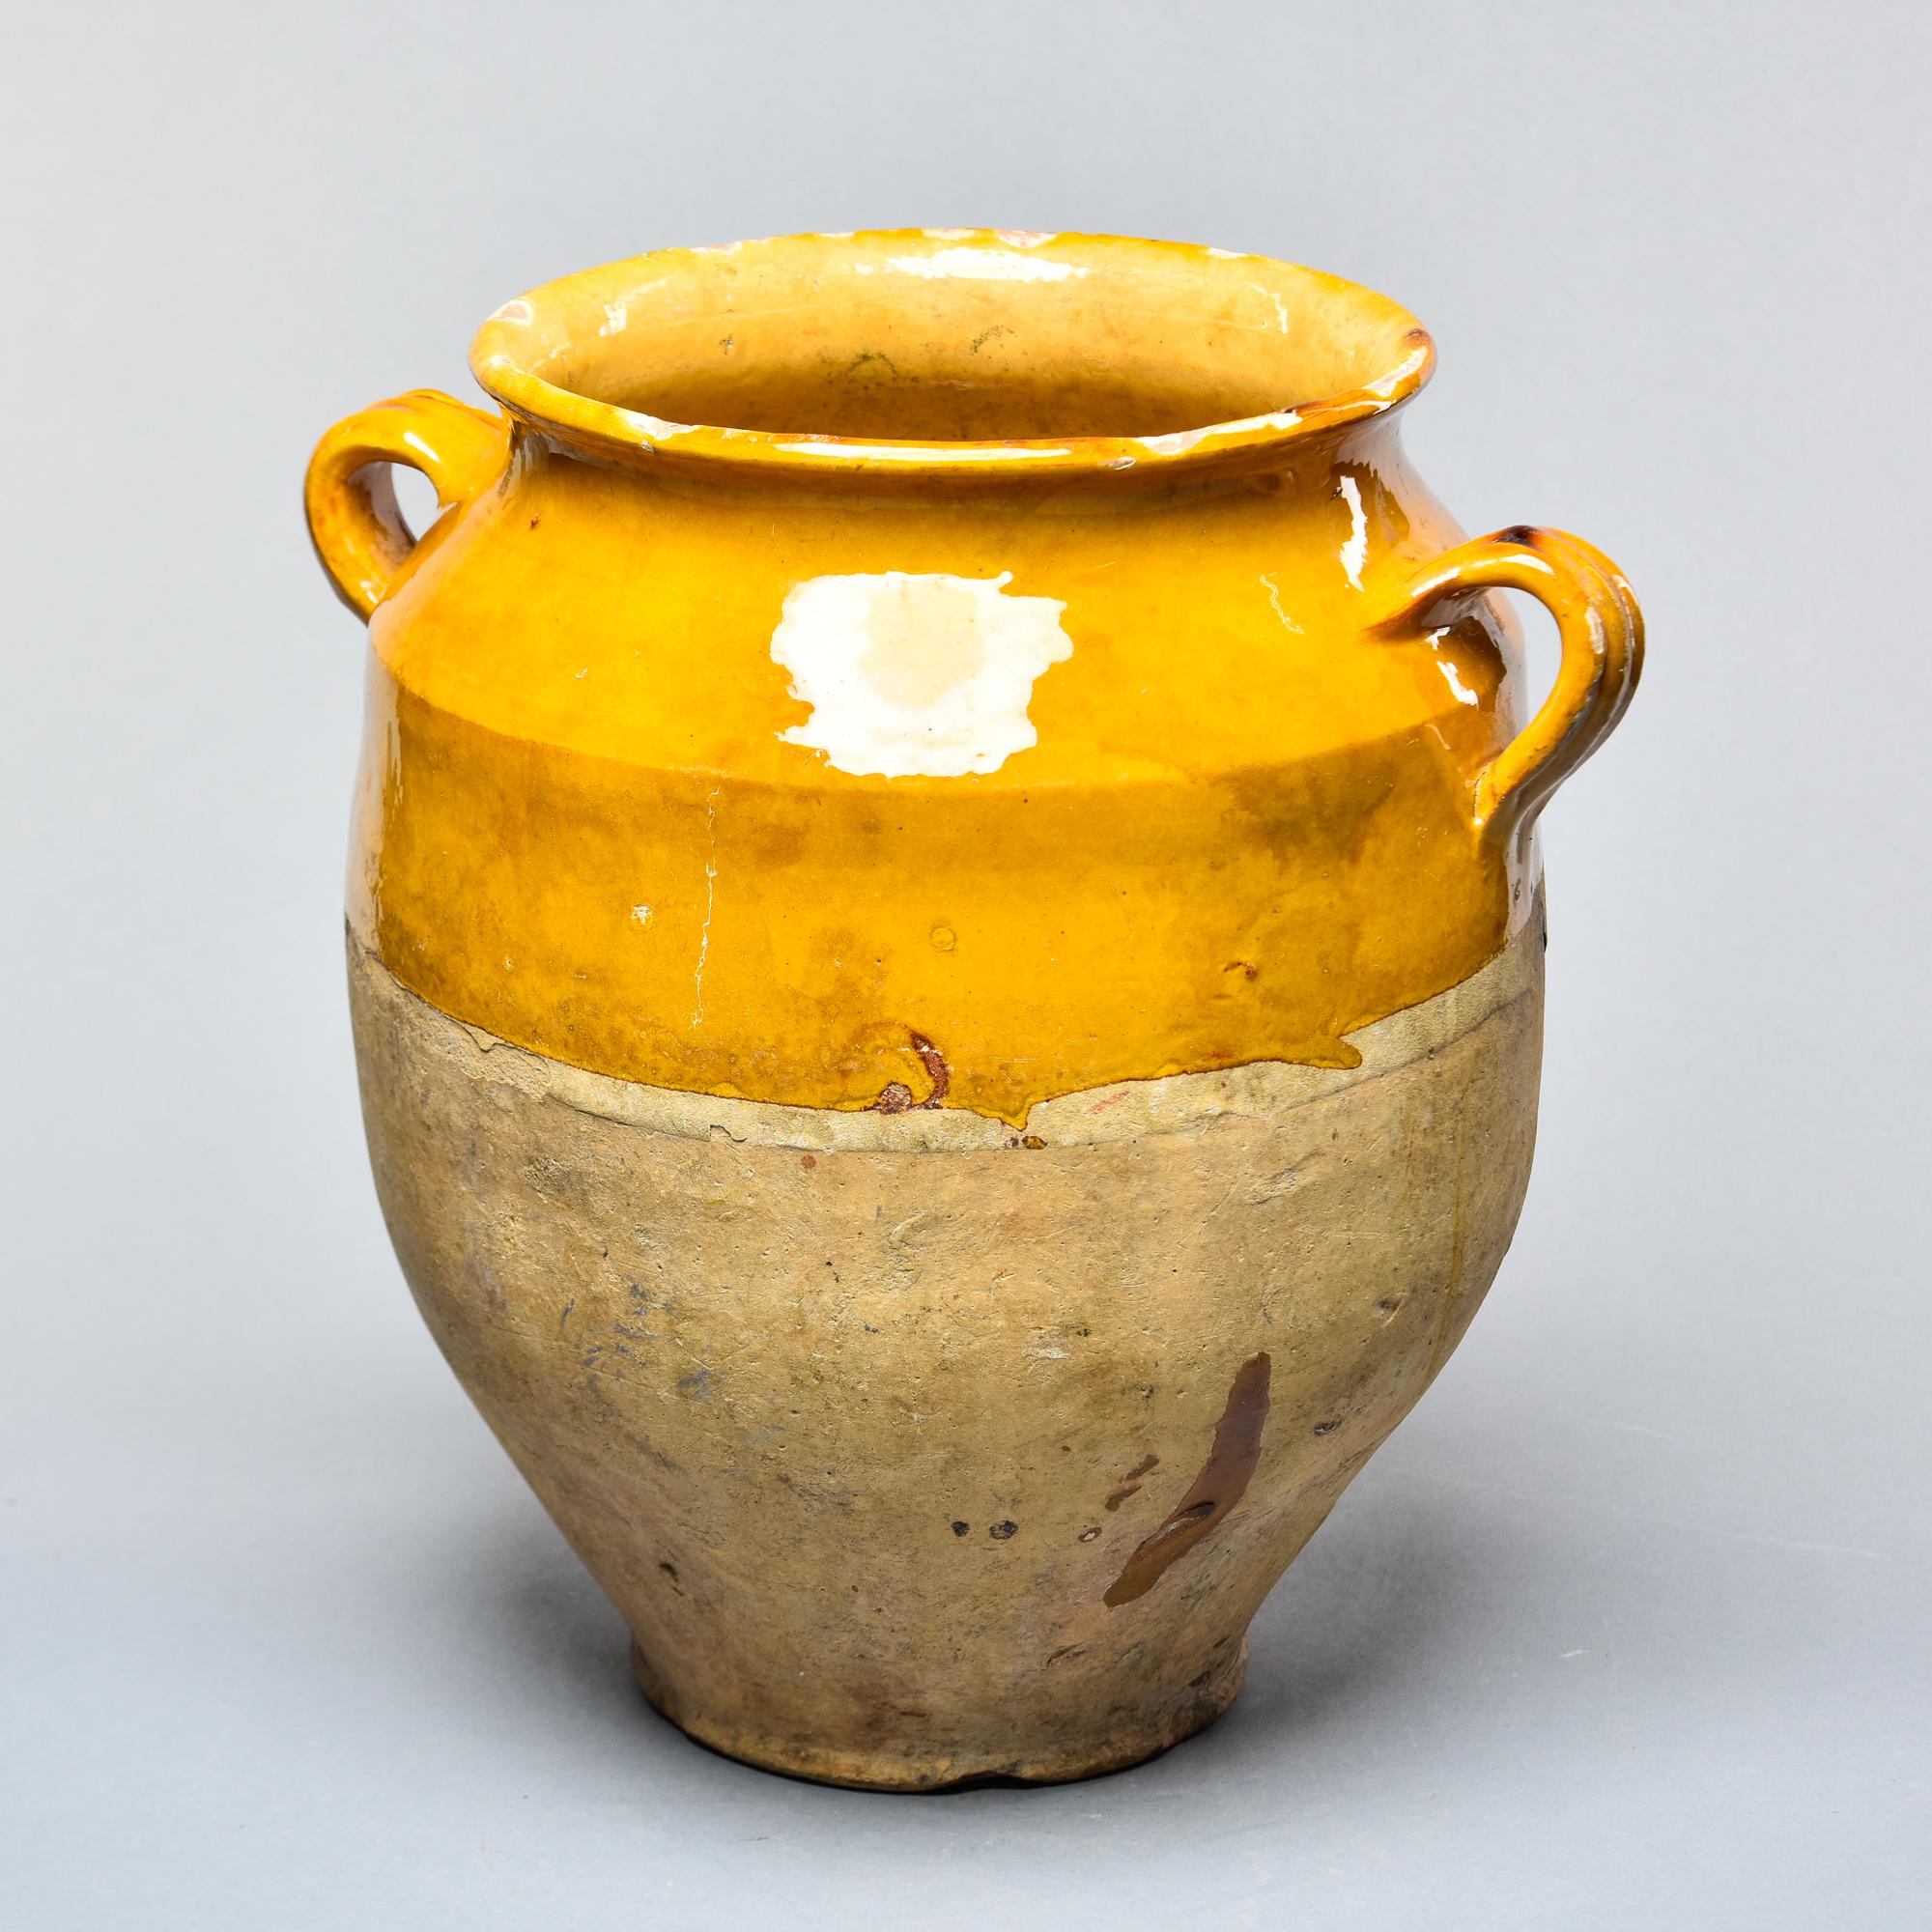 Found in France, this French confit jar dates from approximately 1915. This piece stands 11.5” high and has the traditional form with a wide vessel body and two handles on the sides with a mustard-colored glaze on the outside top half and fully